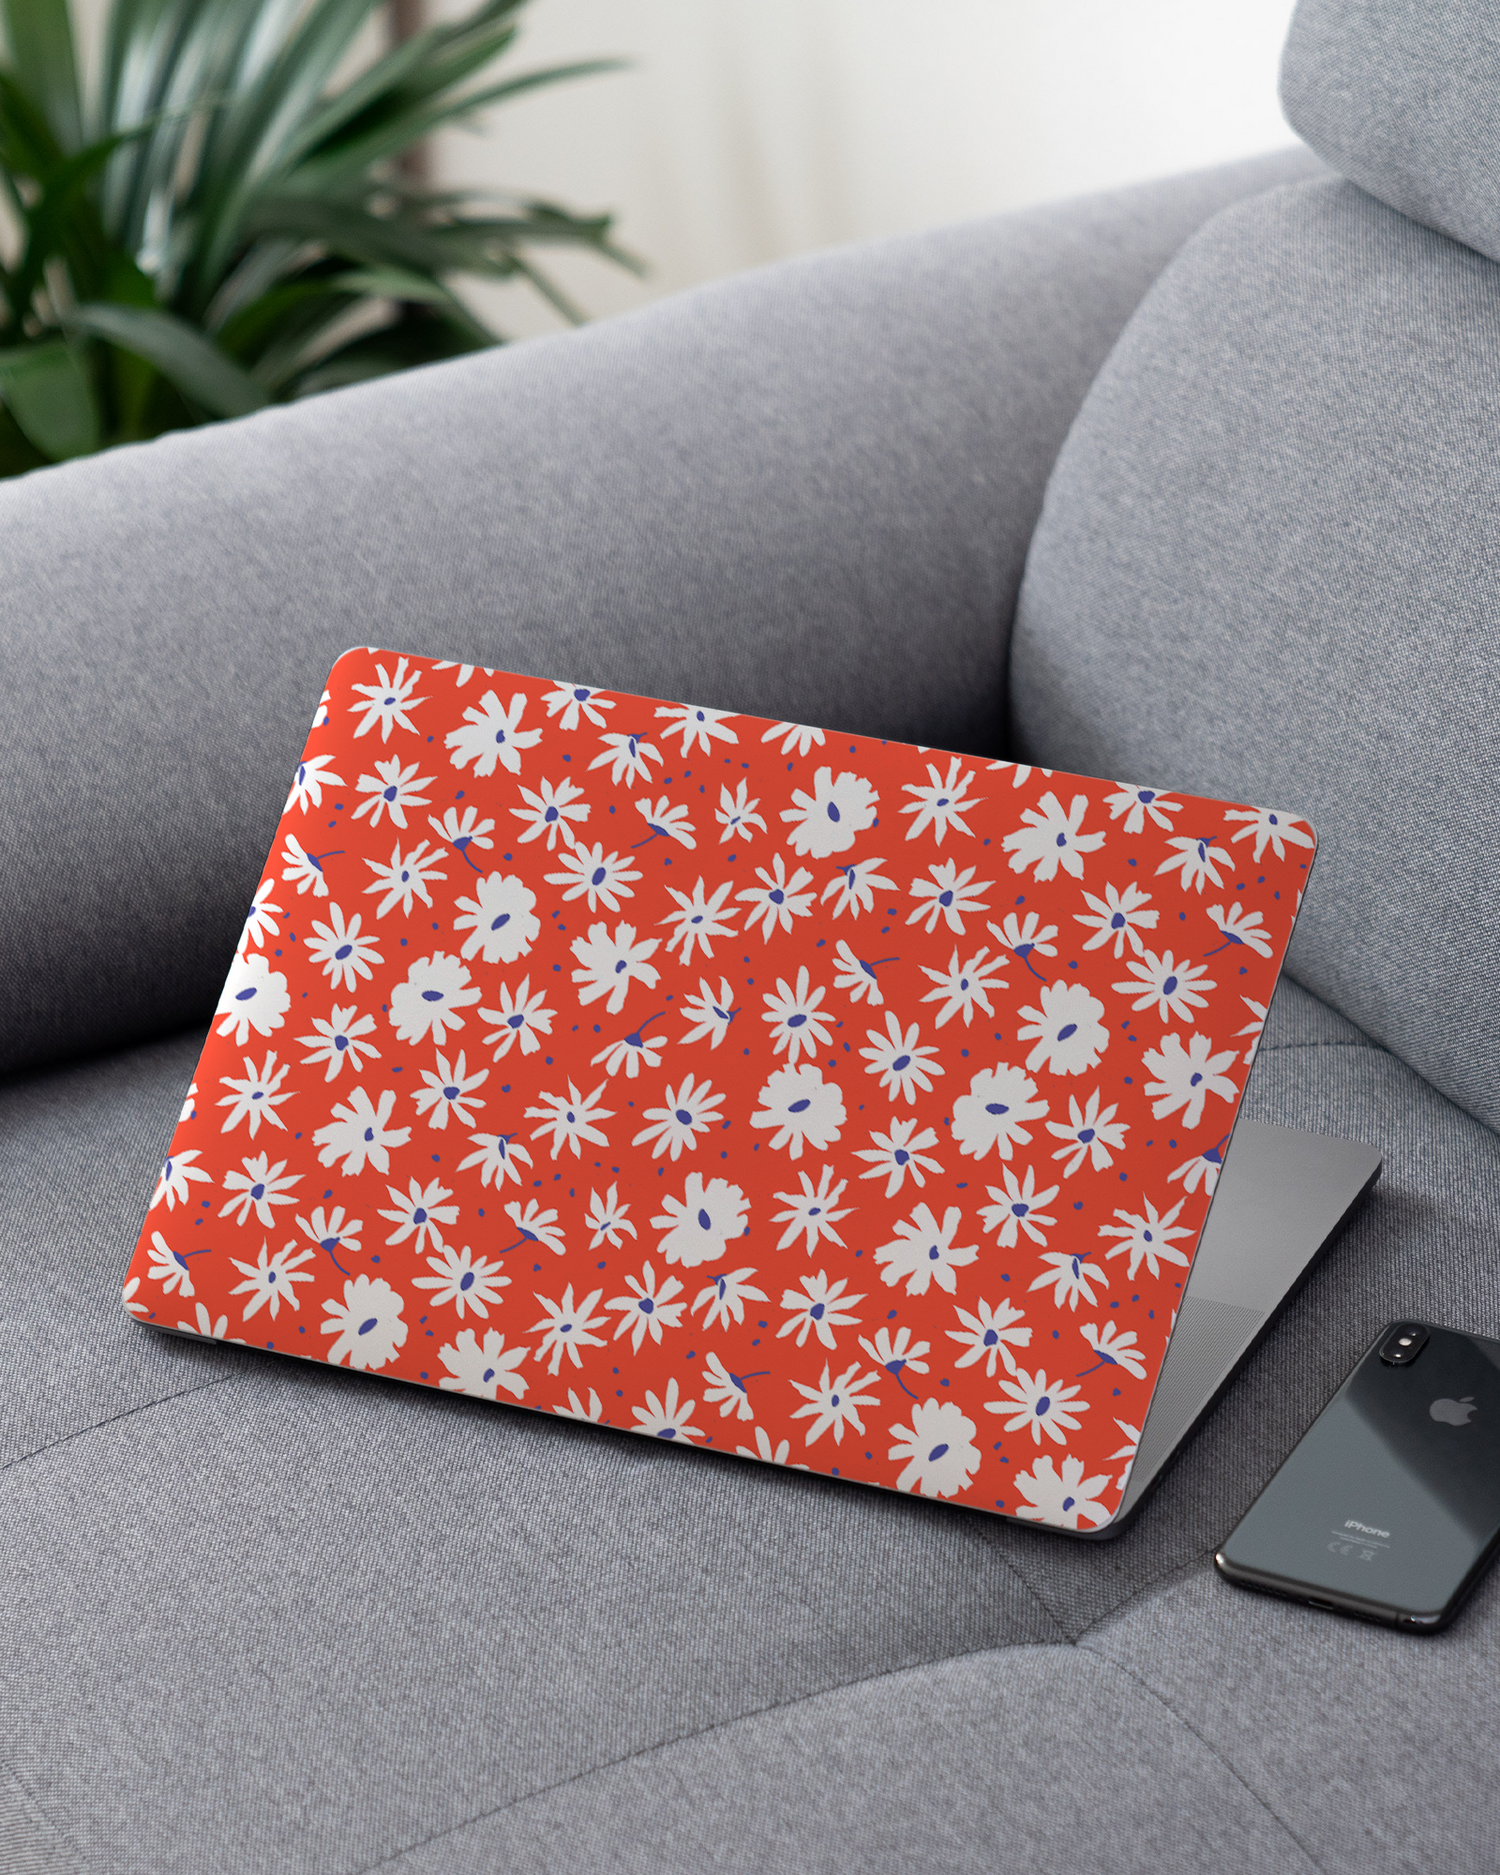 Retro Daisy Laptop Skin for 13 inch Apple MacBooks on a couch